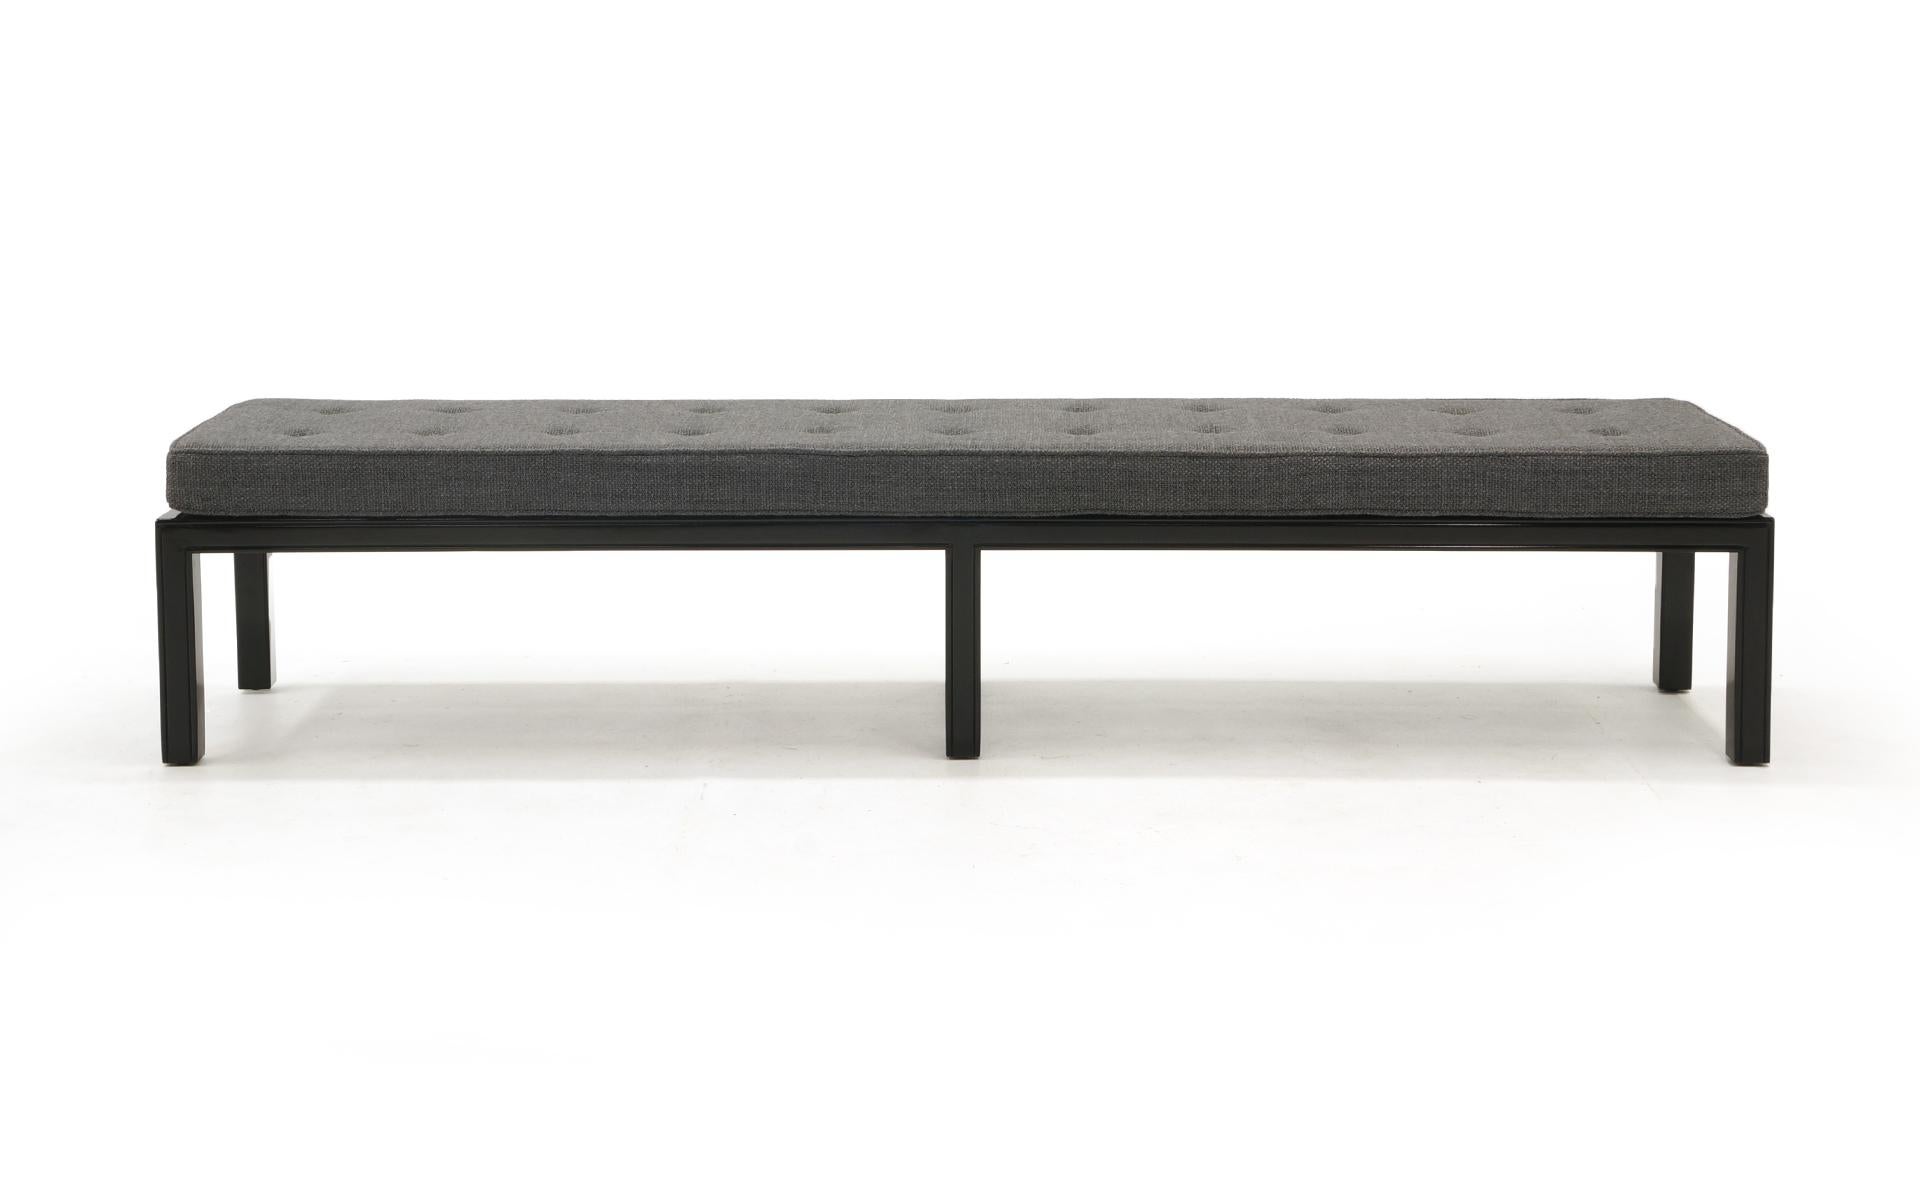 Mid-Century Modern Bench by Henredon, Restored Gloss Black Frames with New Cushions